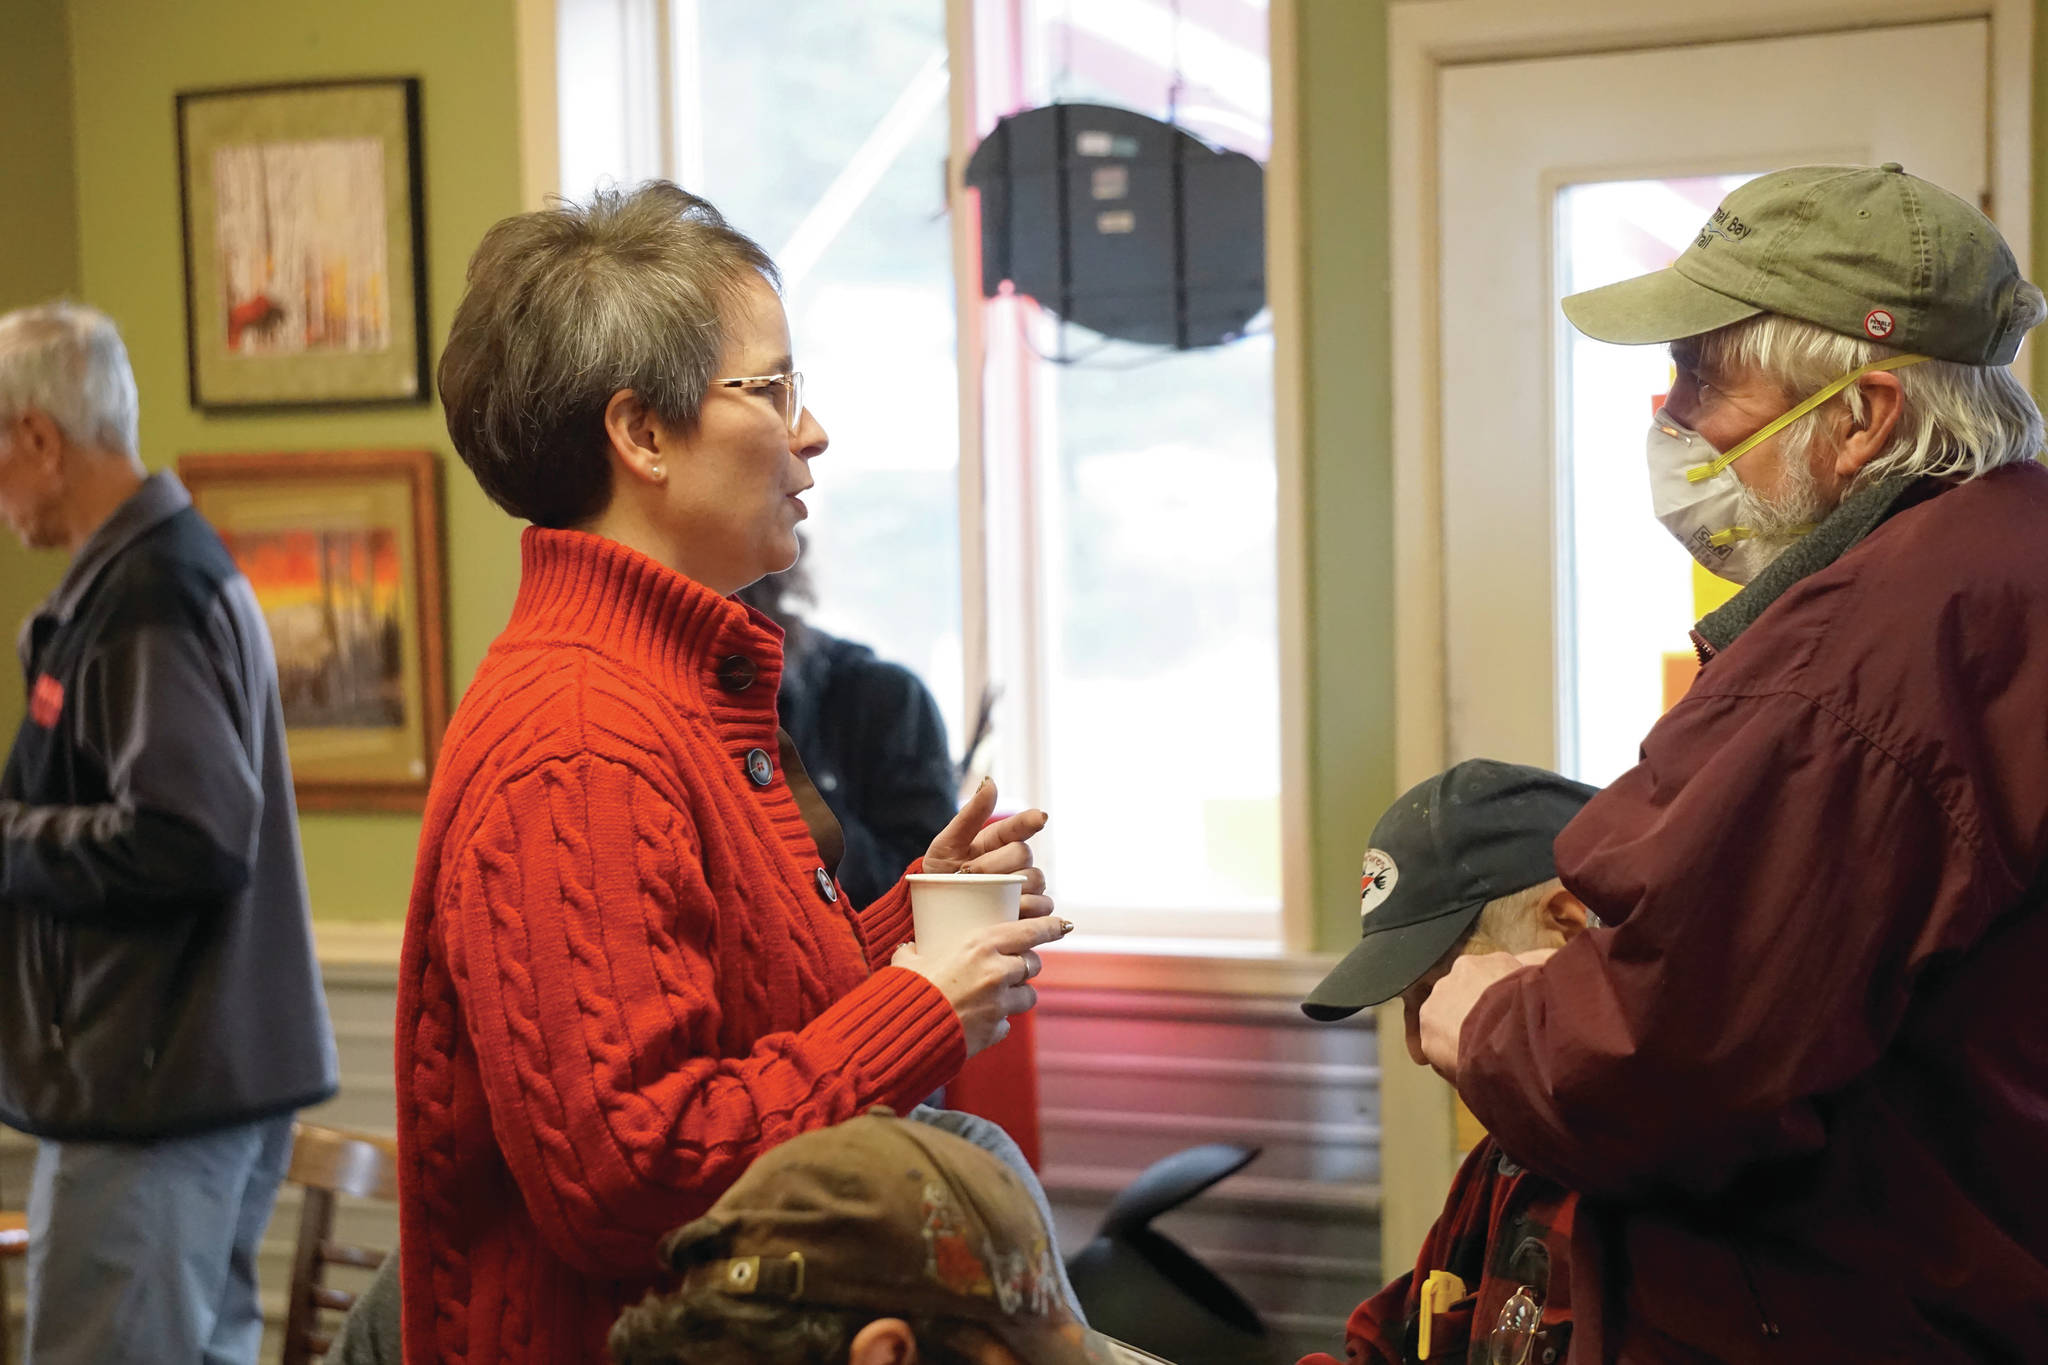 Rep. Sarah Vance, R-Homer, left, speaks with Robert Archibald, right, before holding a town hall meeting on Monday, March 29, 2021, at Captain’s Coffee in Homer, Alaska. Archibald was only one of four people who wore face masks at the event of about 55 people. (Photo by Michael Armstrong/Homer News)